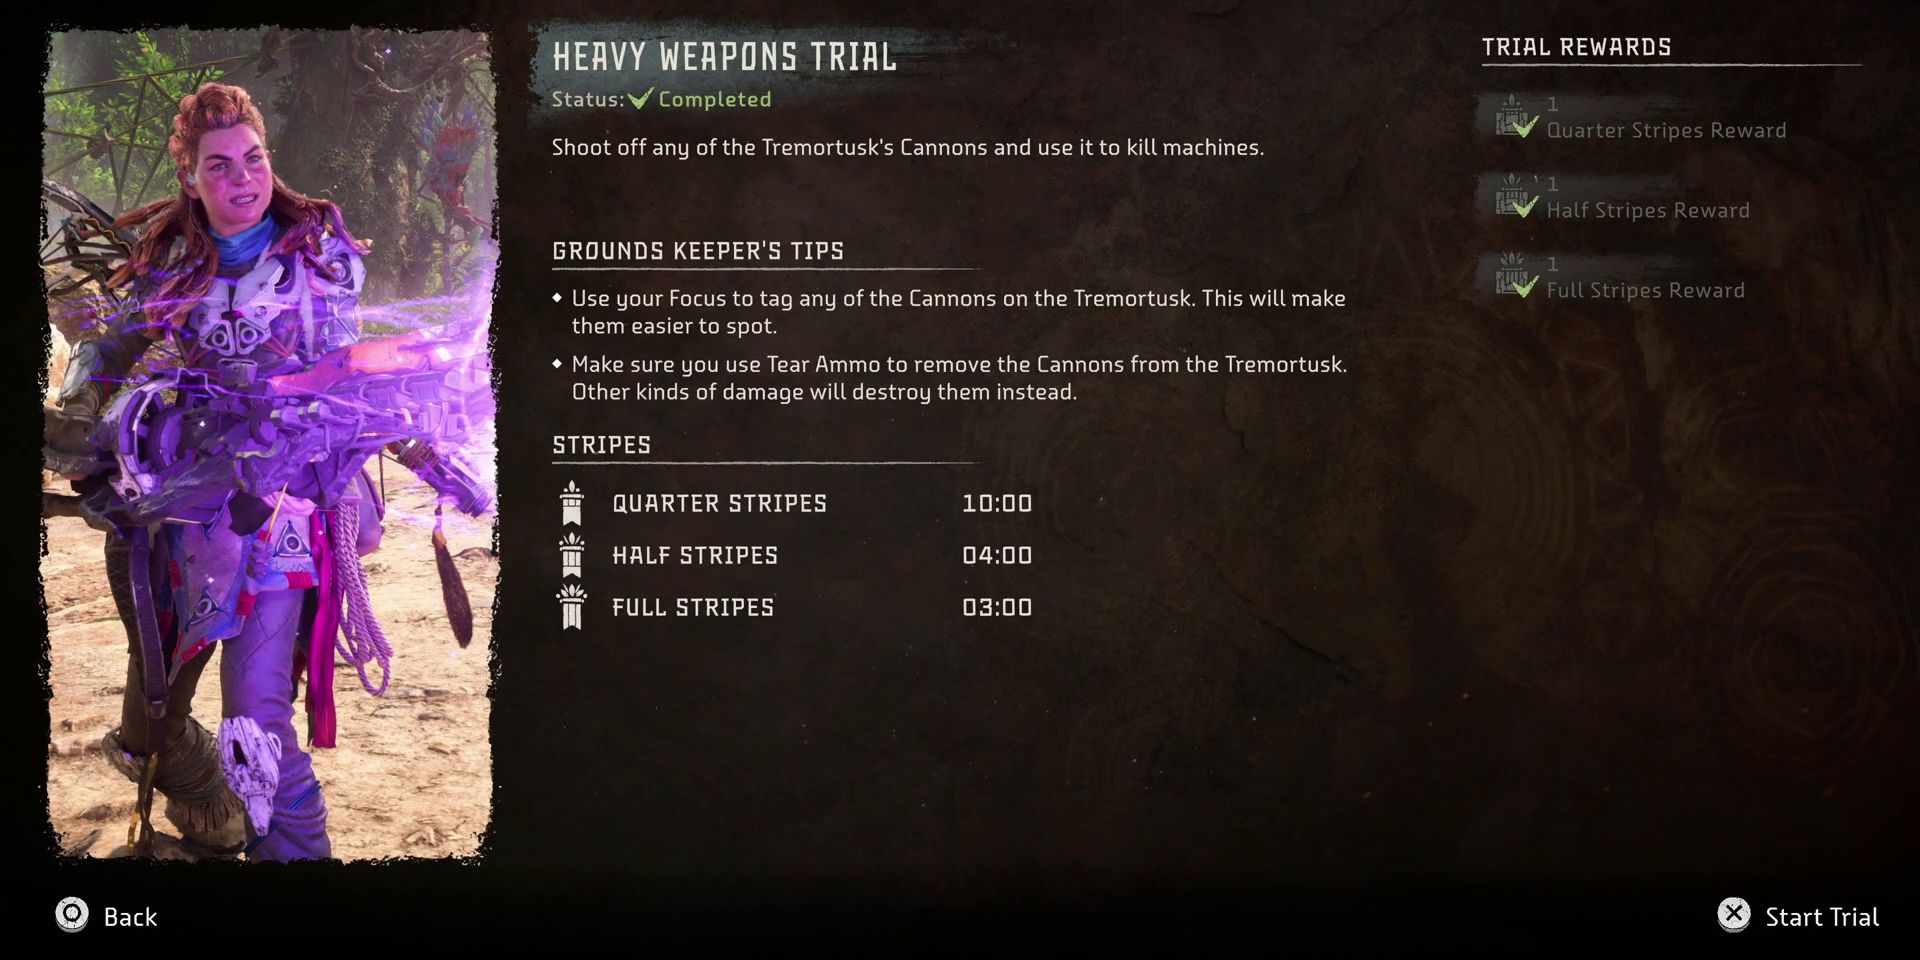 Horizon-Forbidden-Legacy-Raintrace-Hunting-Guide-05-Heavy-Weapons-Trial-Info